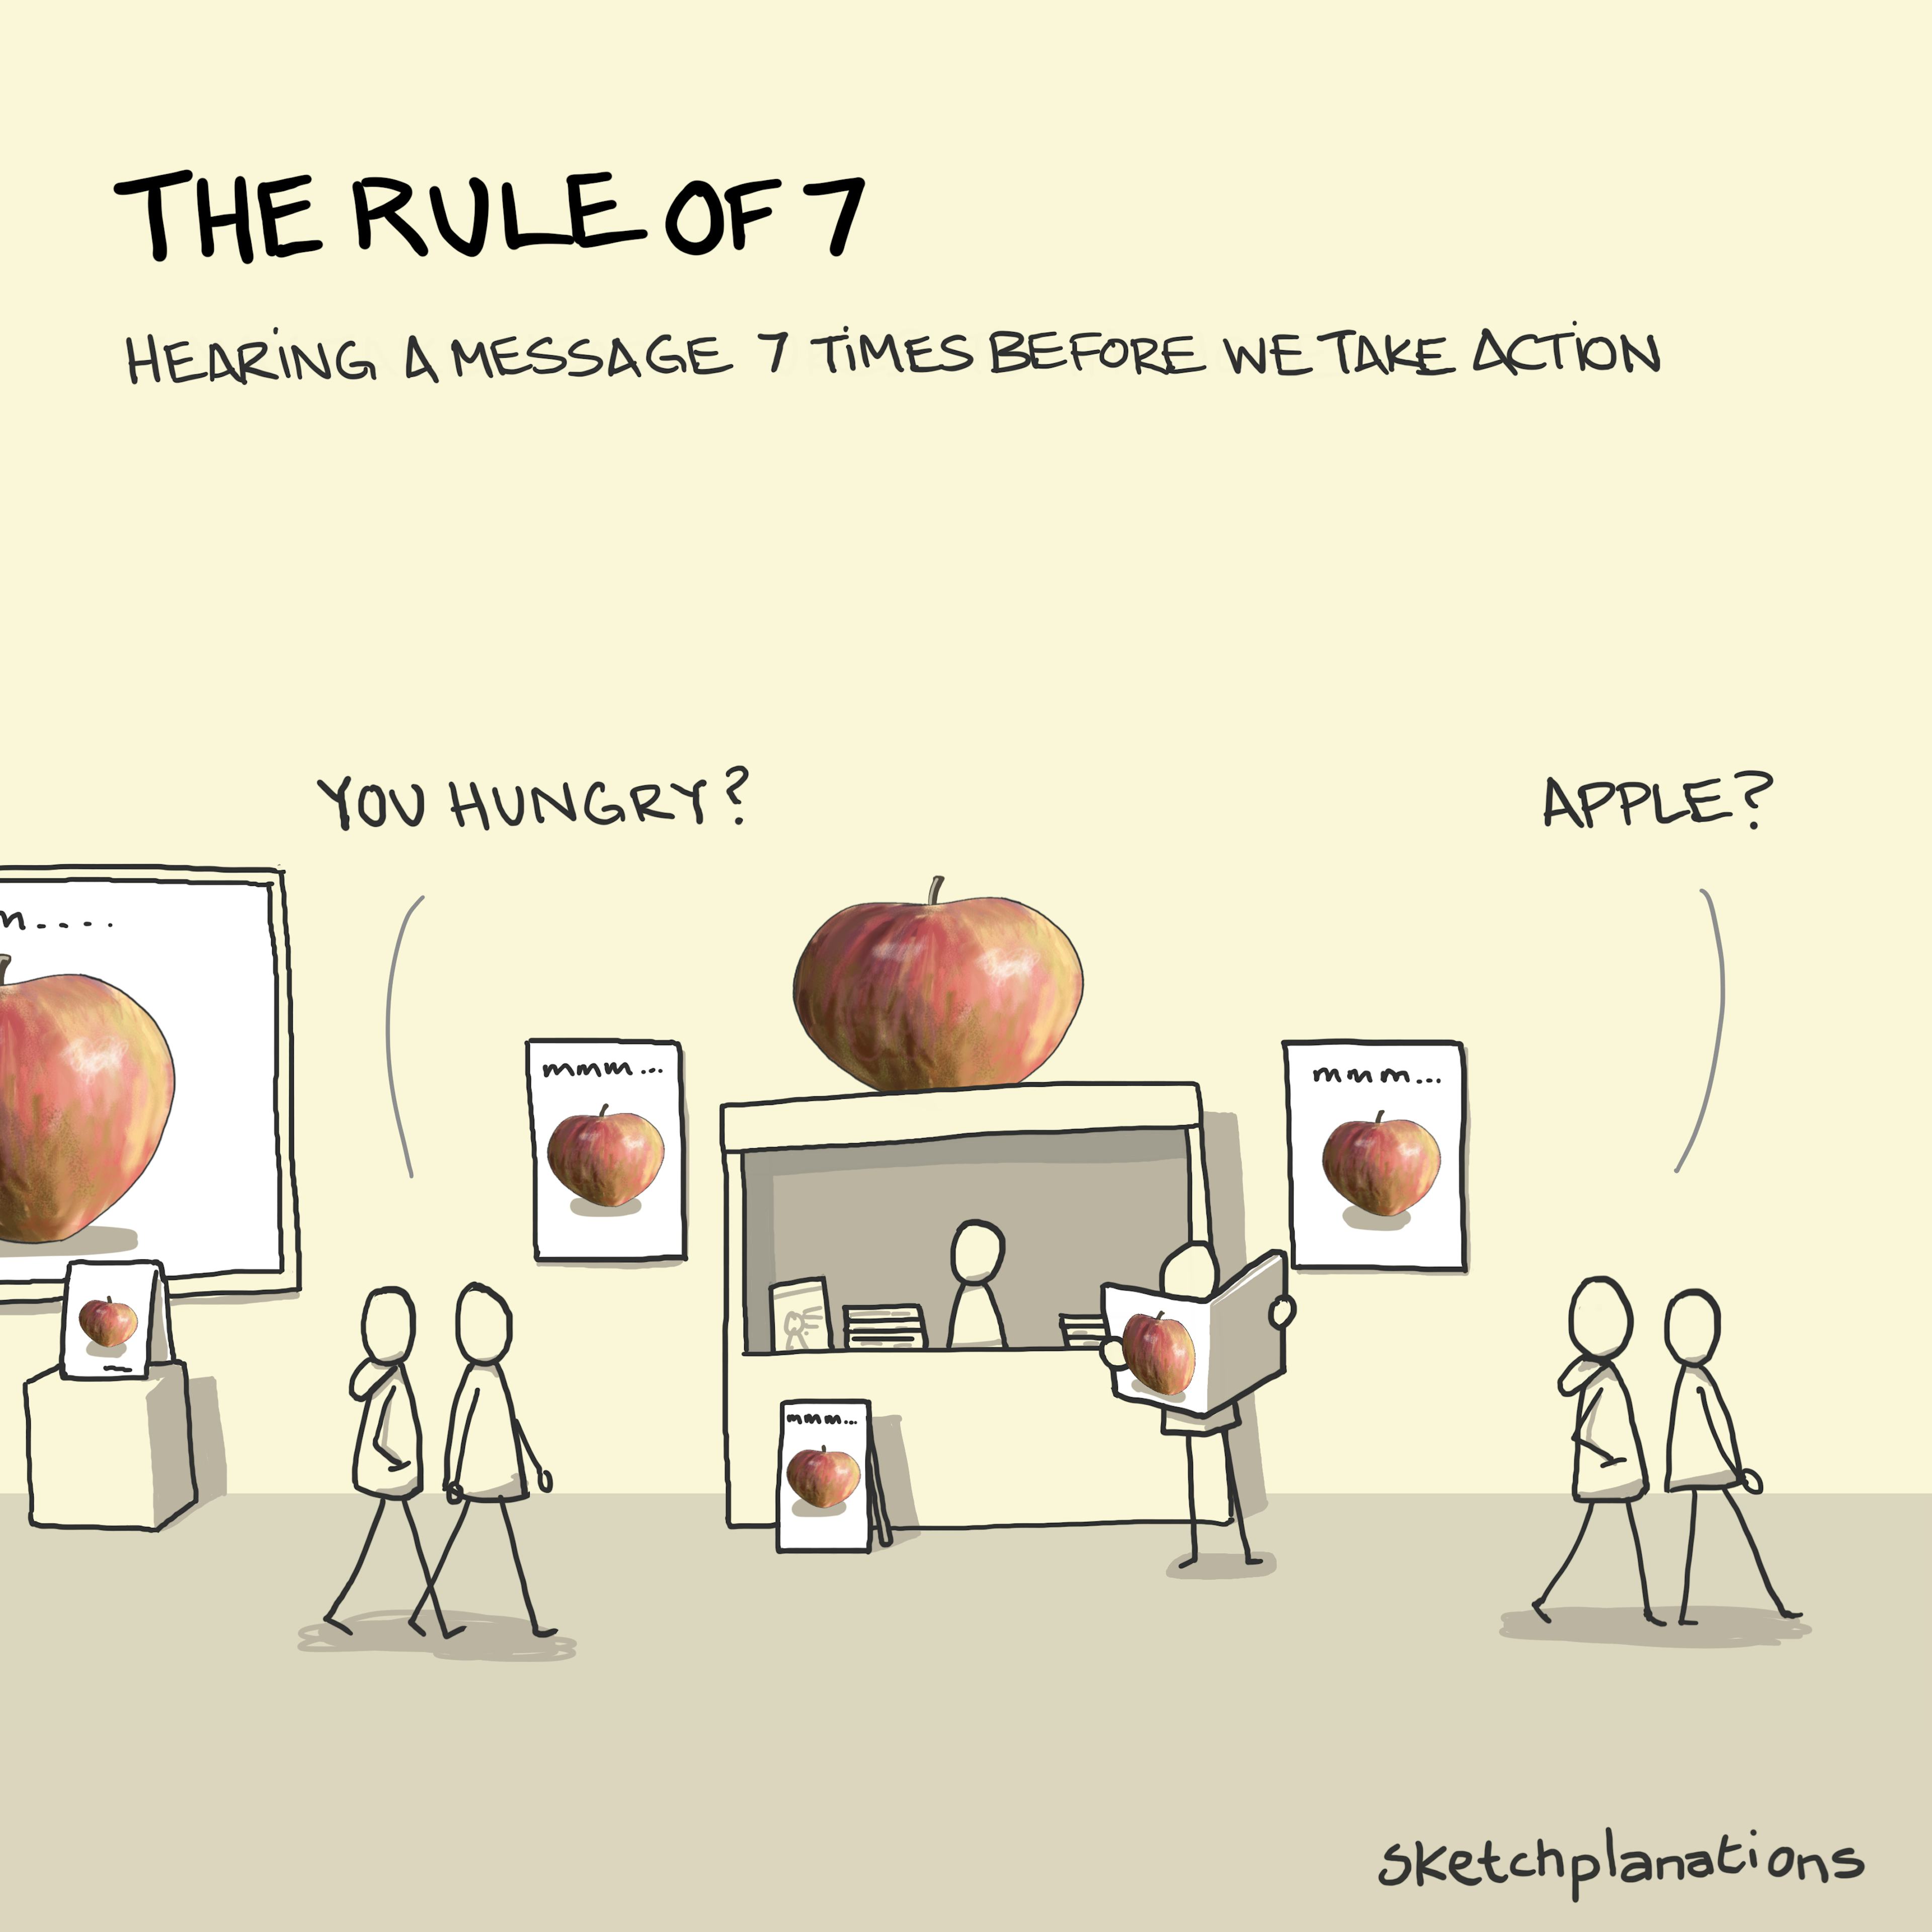 The Rule of 7 illustration: two people walk together along the street, bombarded by imagery of apples; on posters, on the front page of newspapers, by a large promotional 3-D apple perched atop a news-stand. By the end of the scene, their conversation about whether they are hungry has turned to one specifically about buying an apple to eat. 